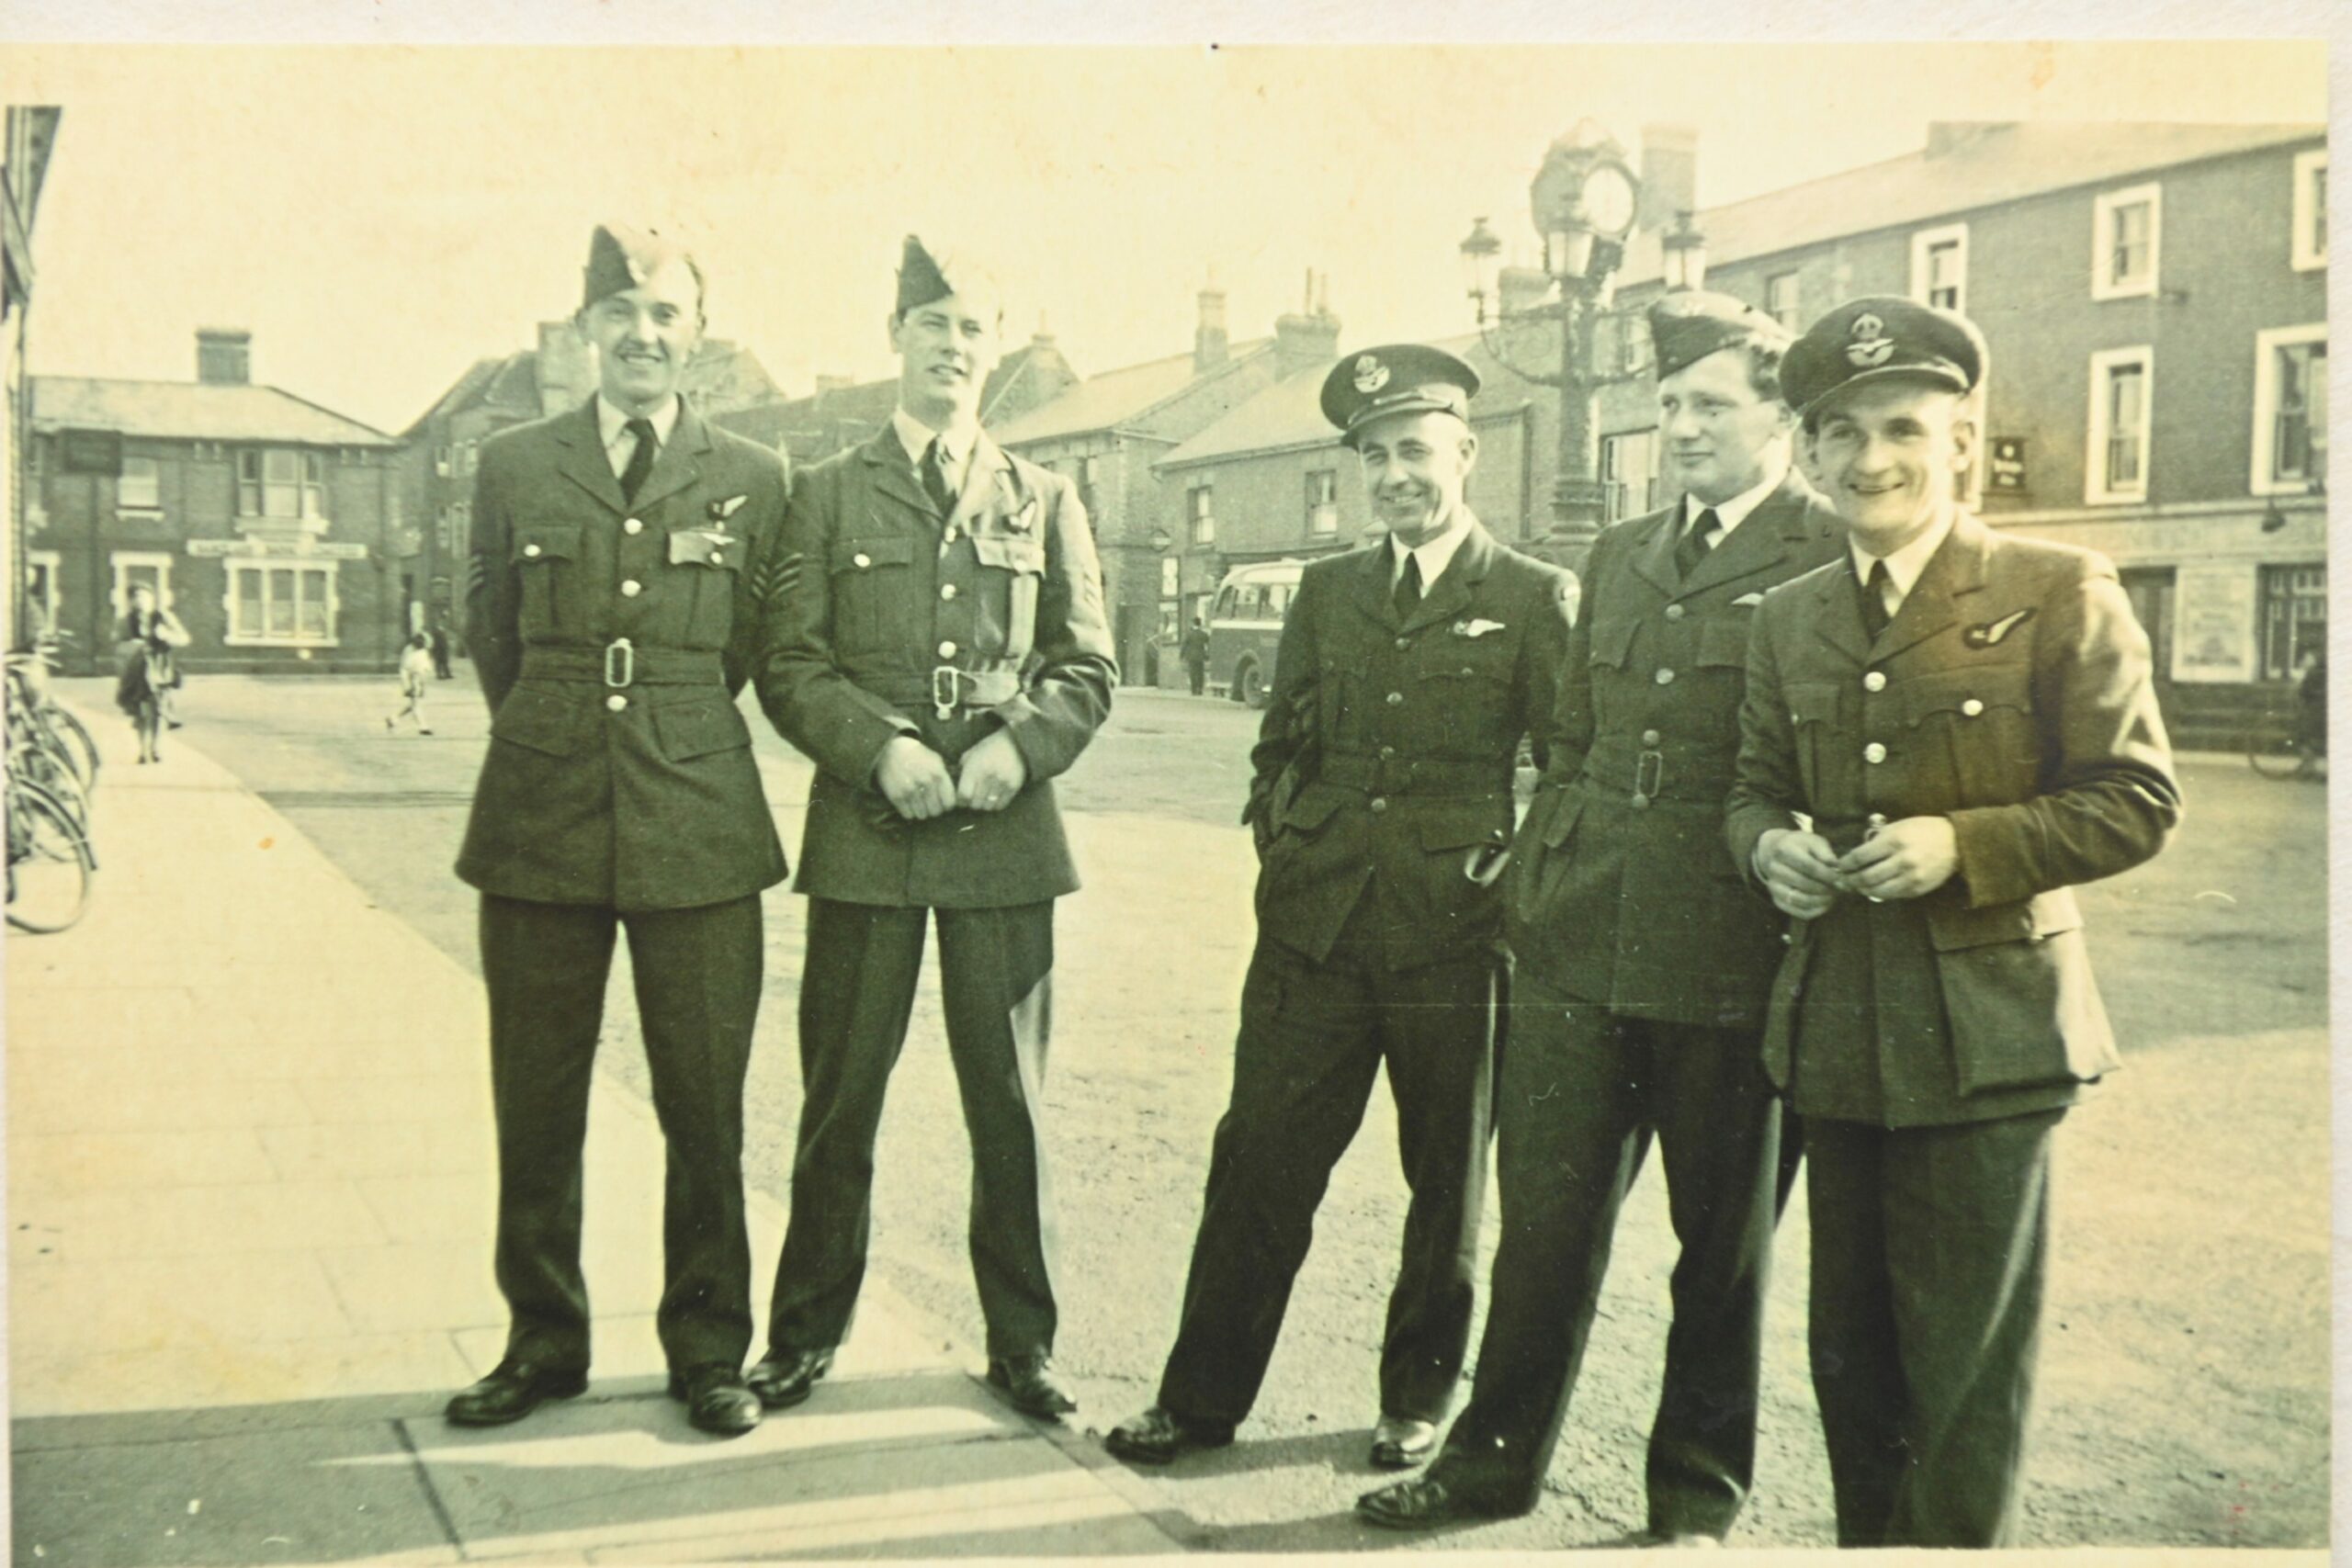 Bill, second from left, next to his mate Norman Piercy, with other air crew members.